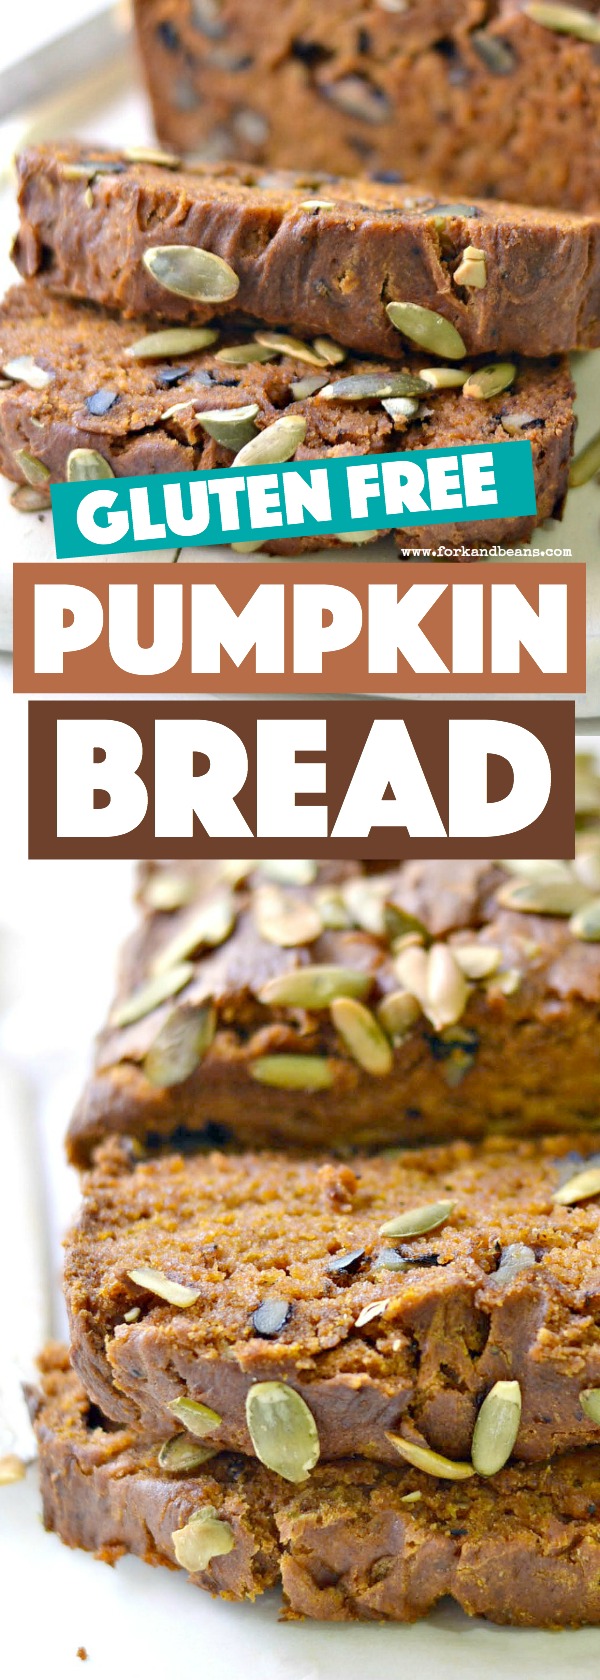 This gluten free vegan pumpkin bread is so moist and tasty, you'll never know it's made without gluten, eggs, and dairy!